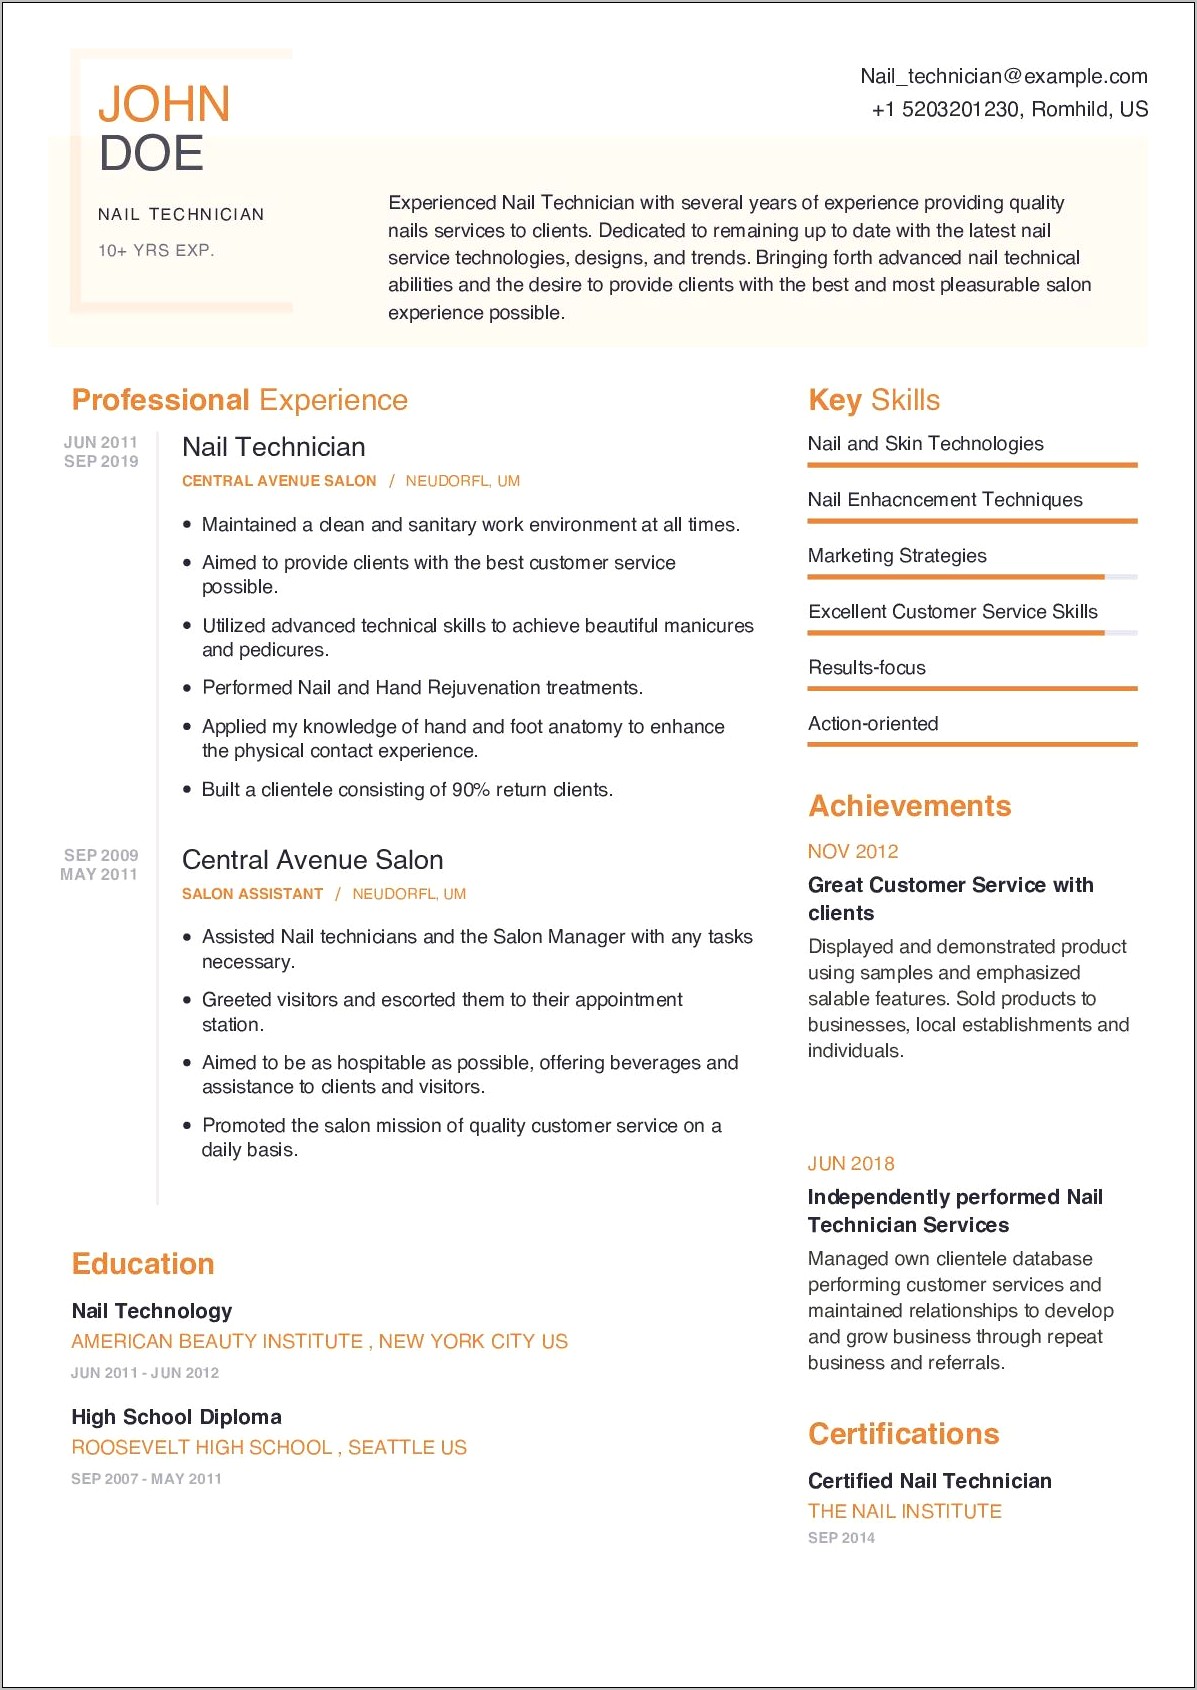 Resume Objective For A Nail Technician